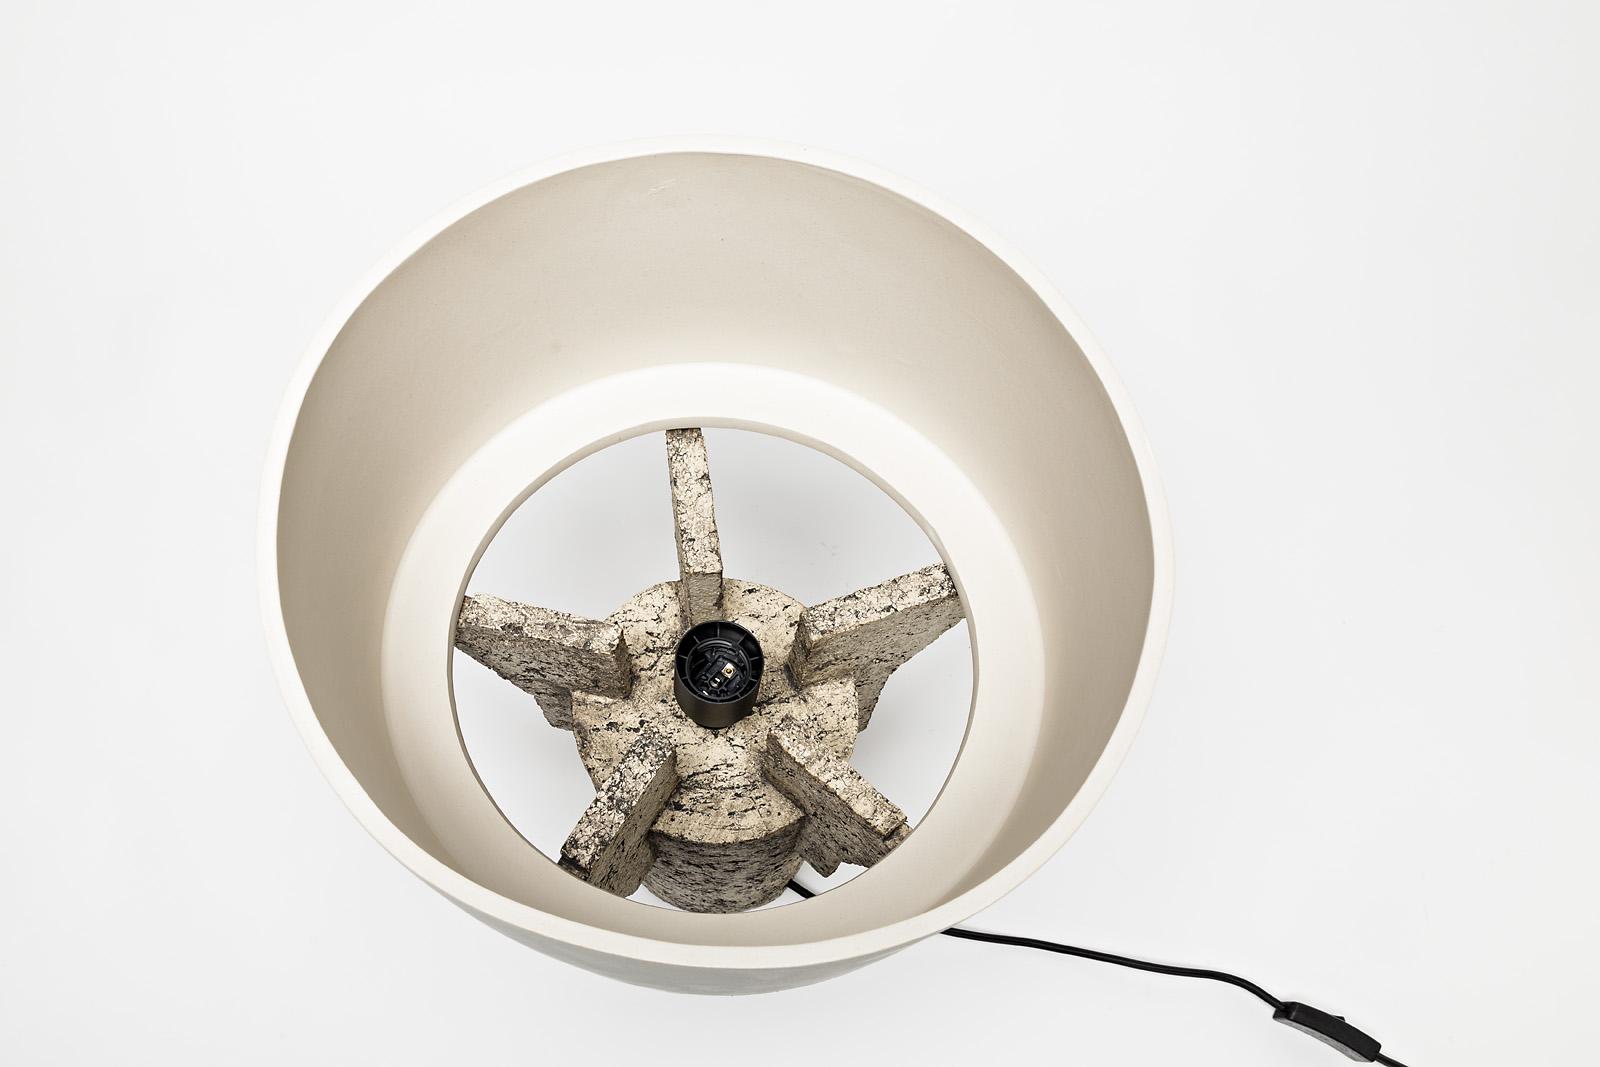 Contemporary Ceramic Table Lamp by Denis Castaing with White Glaze Decoration, 2019 For Sale